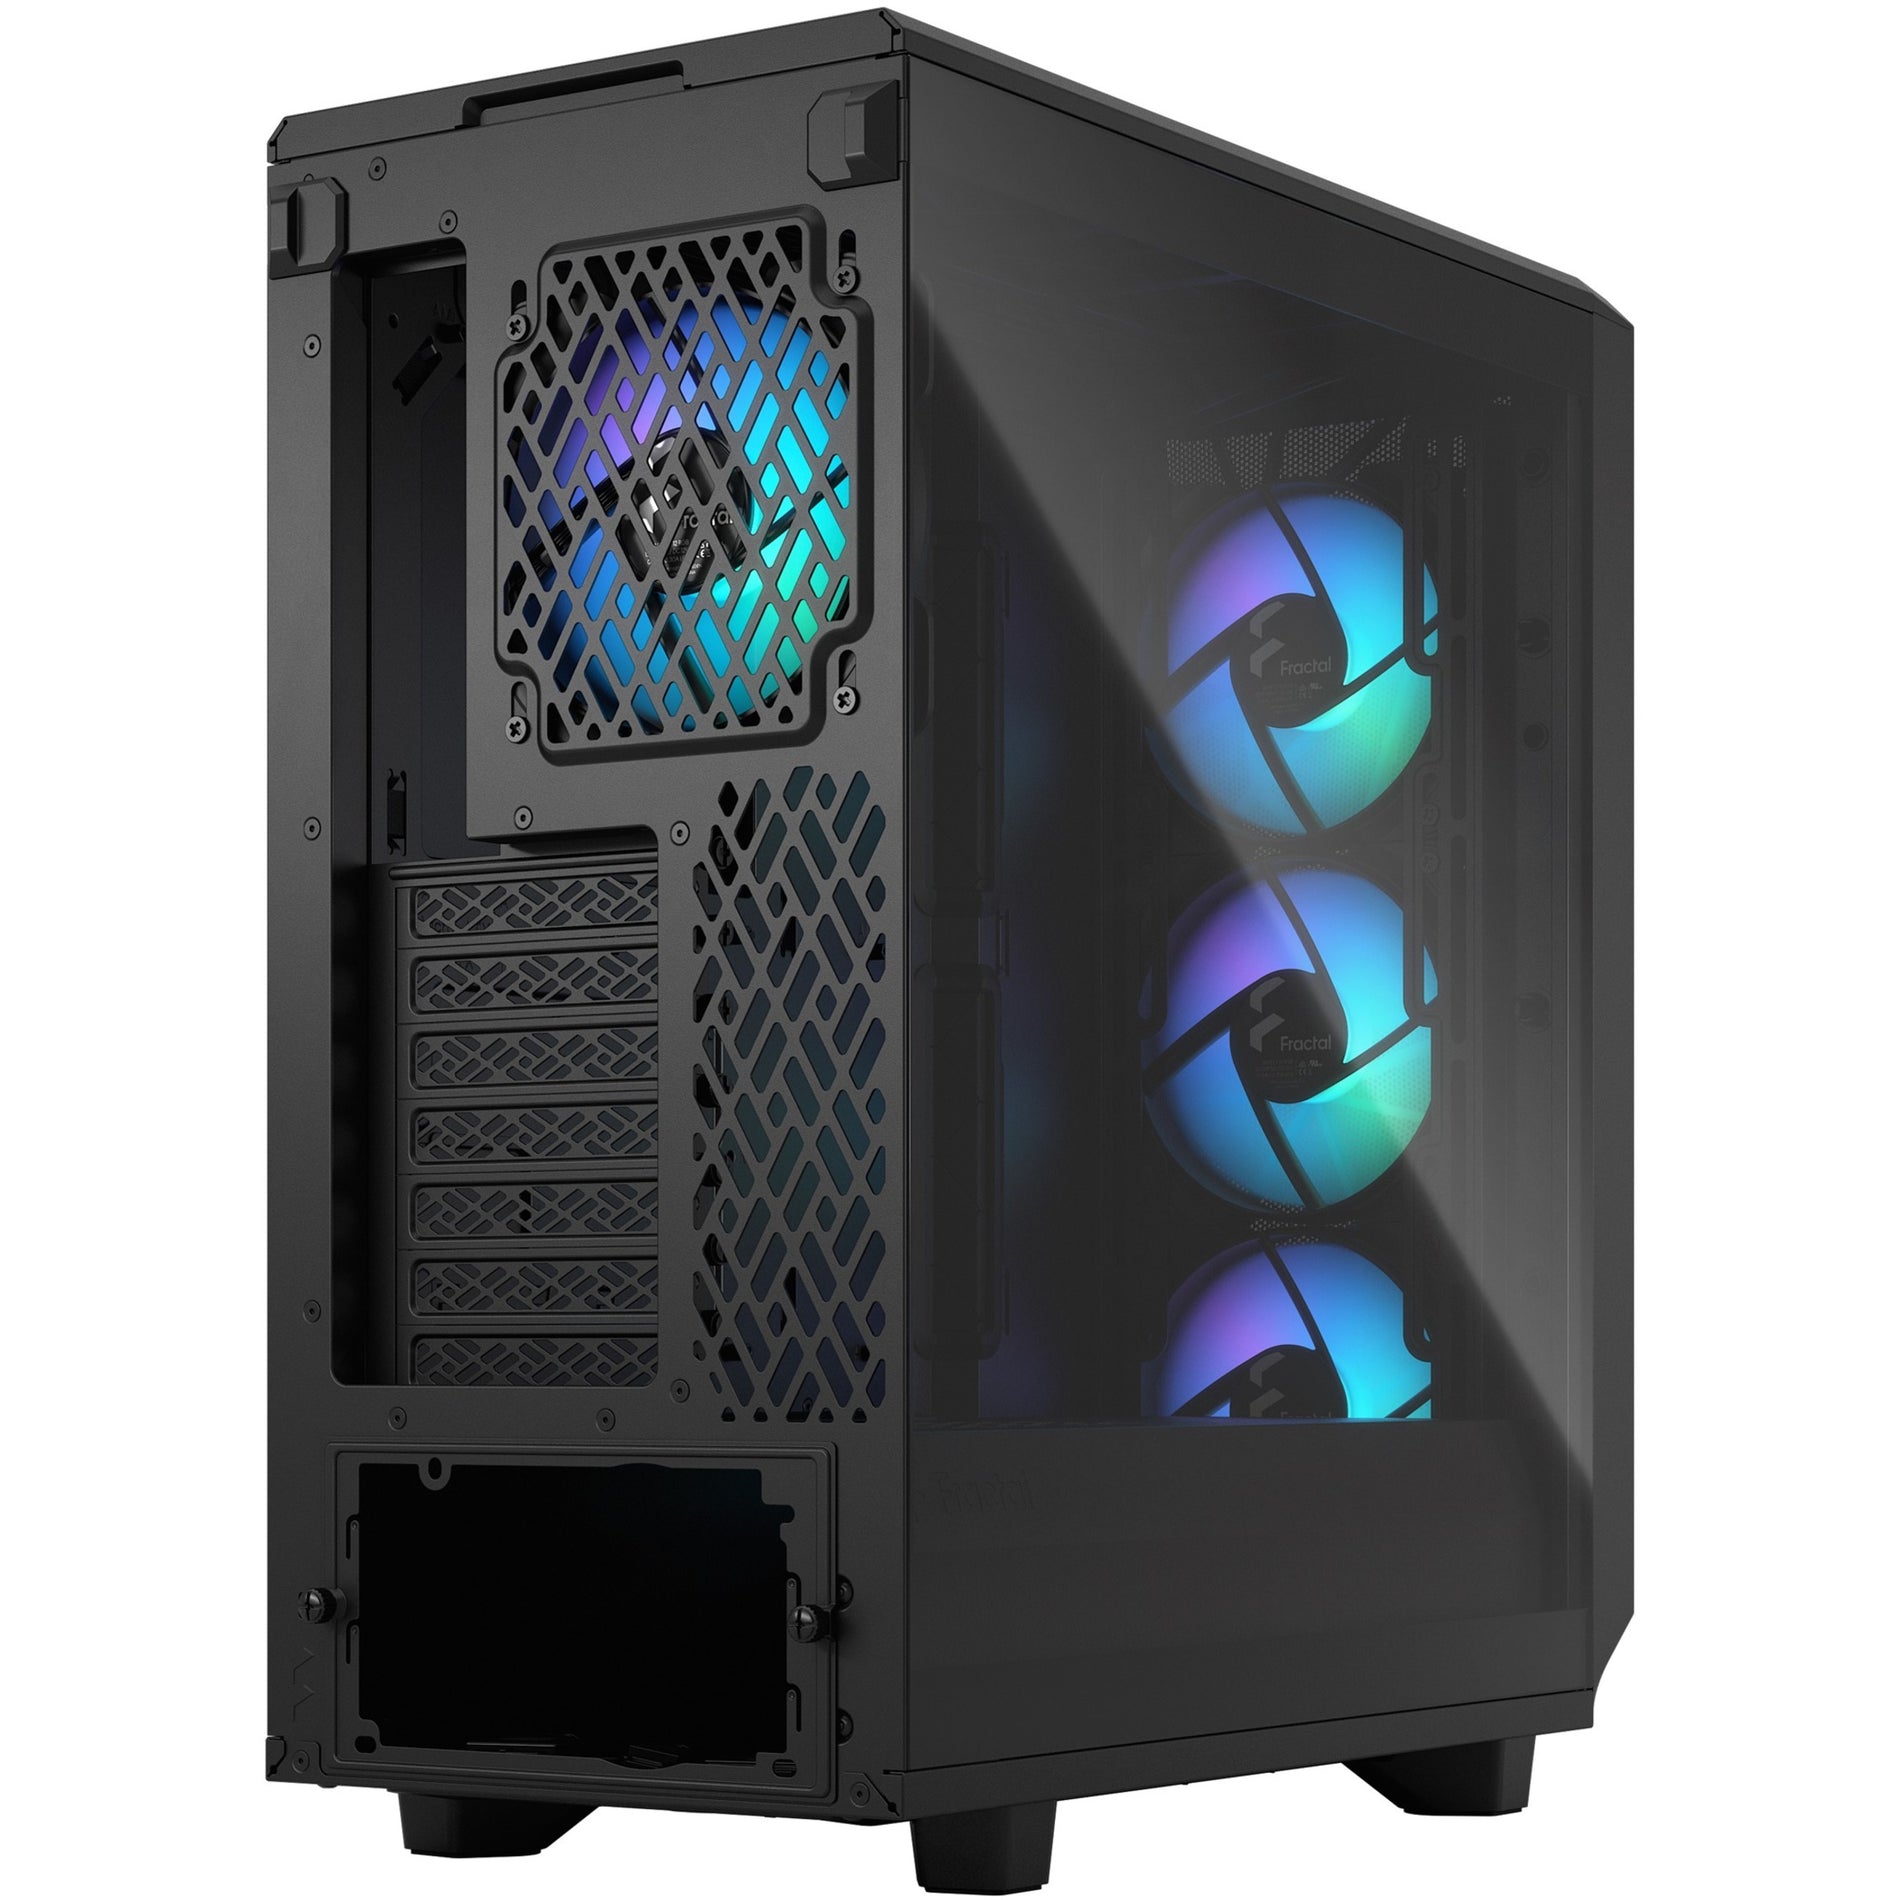 Fractal Design FD-C-MES2C-06 Meshify 2 Compact RGB Computer Case, Mid-tower, Black, 4.72" Fans, Mini ITX/Mini ATX/ATX Supported, 18.74 lb Weight